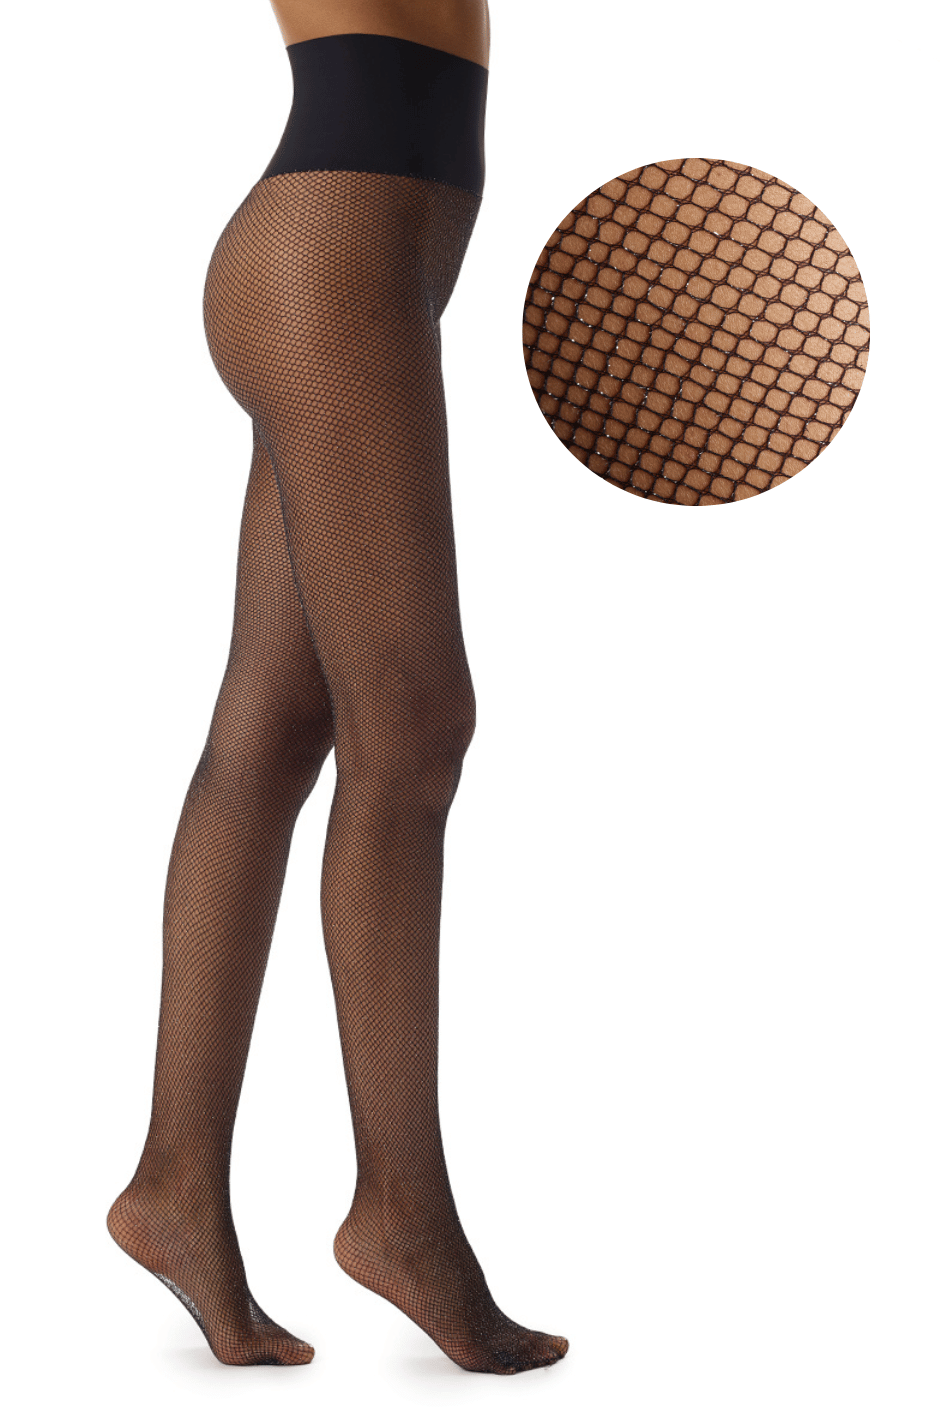 Twinkle Net Tights - Expressive Collective CO.